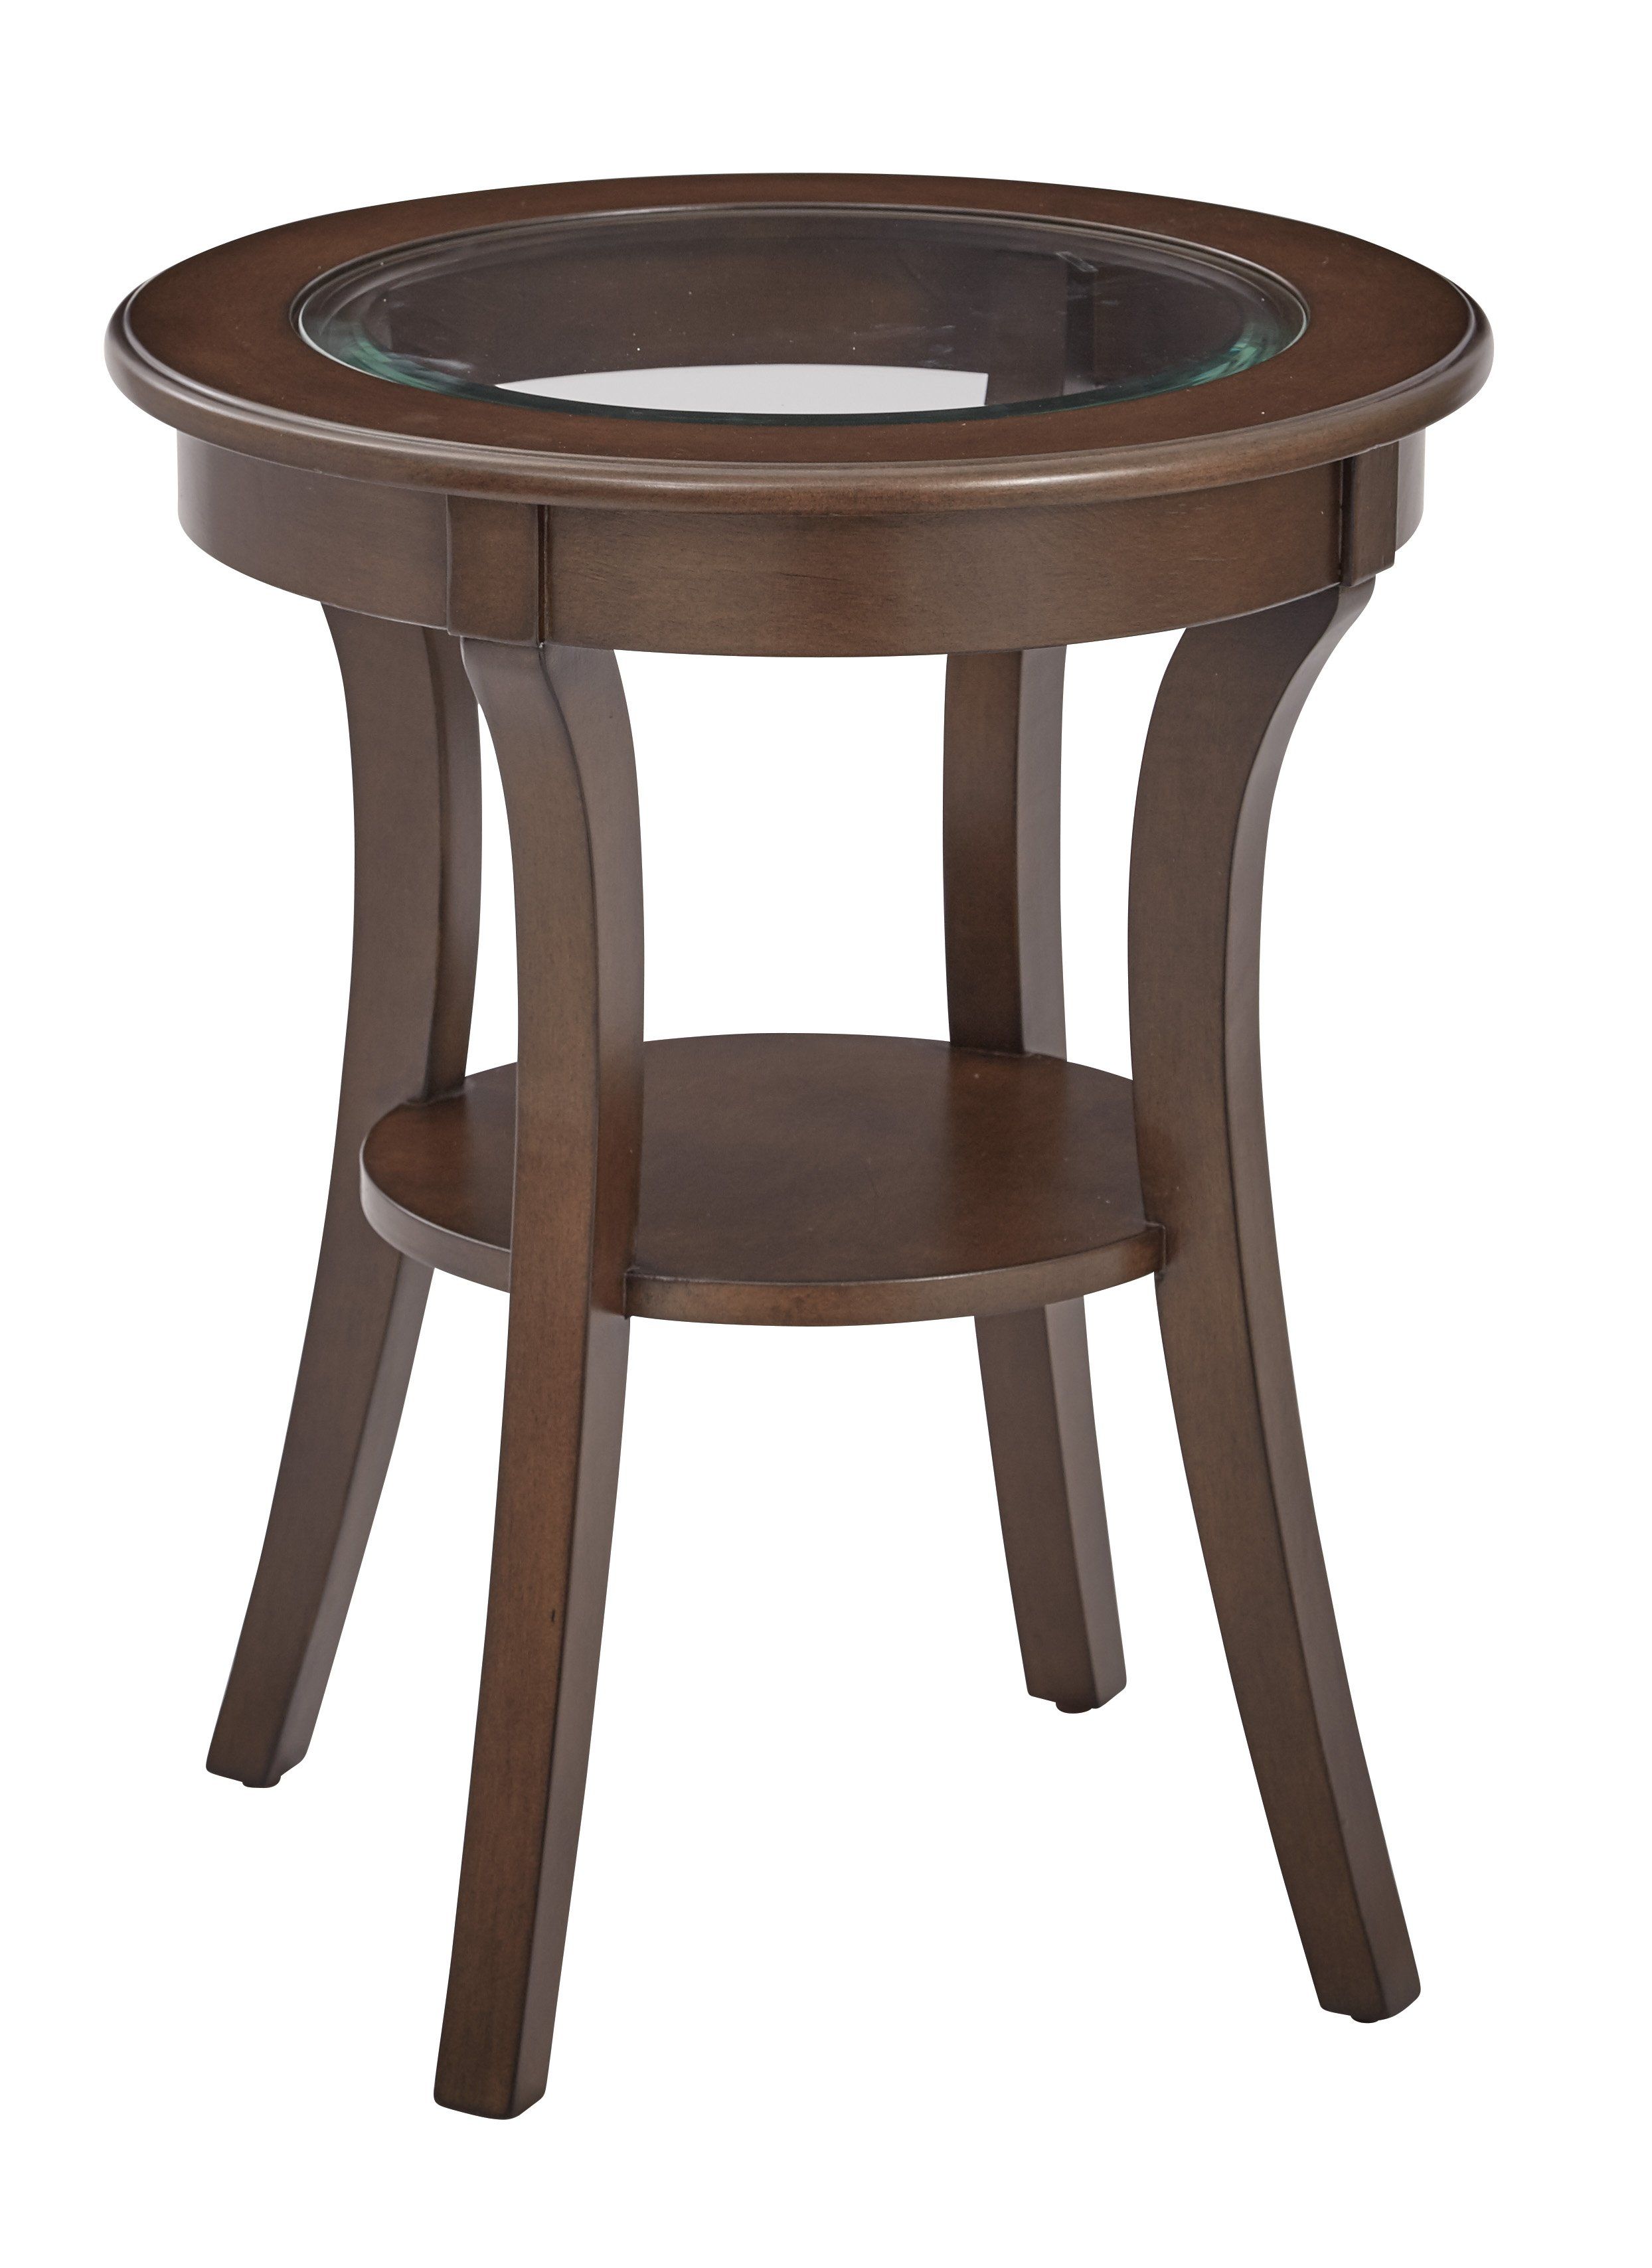 office star macchiato harper round accent table products phone console chest drawers ikea living room sets unusual nest tables pier one tures west elm mini desk black bar height